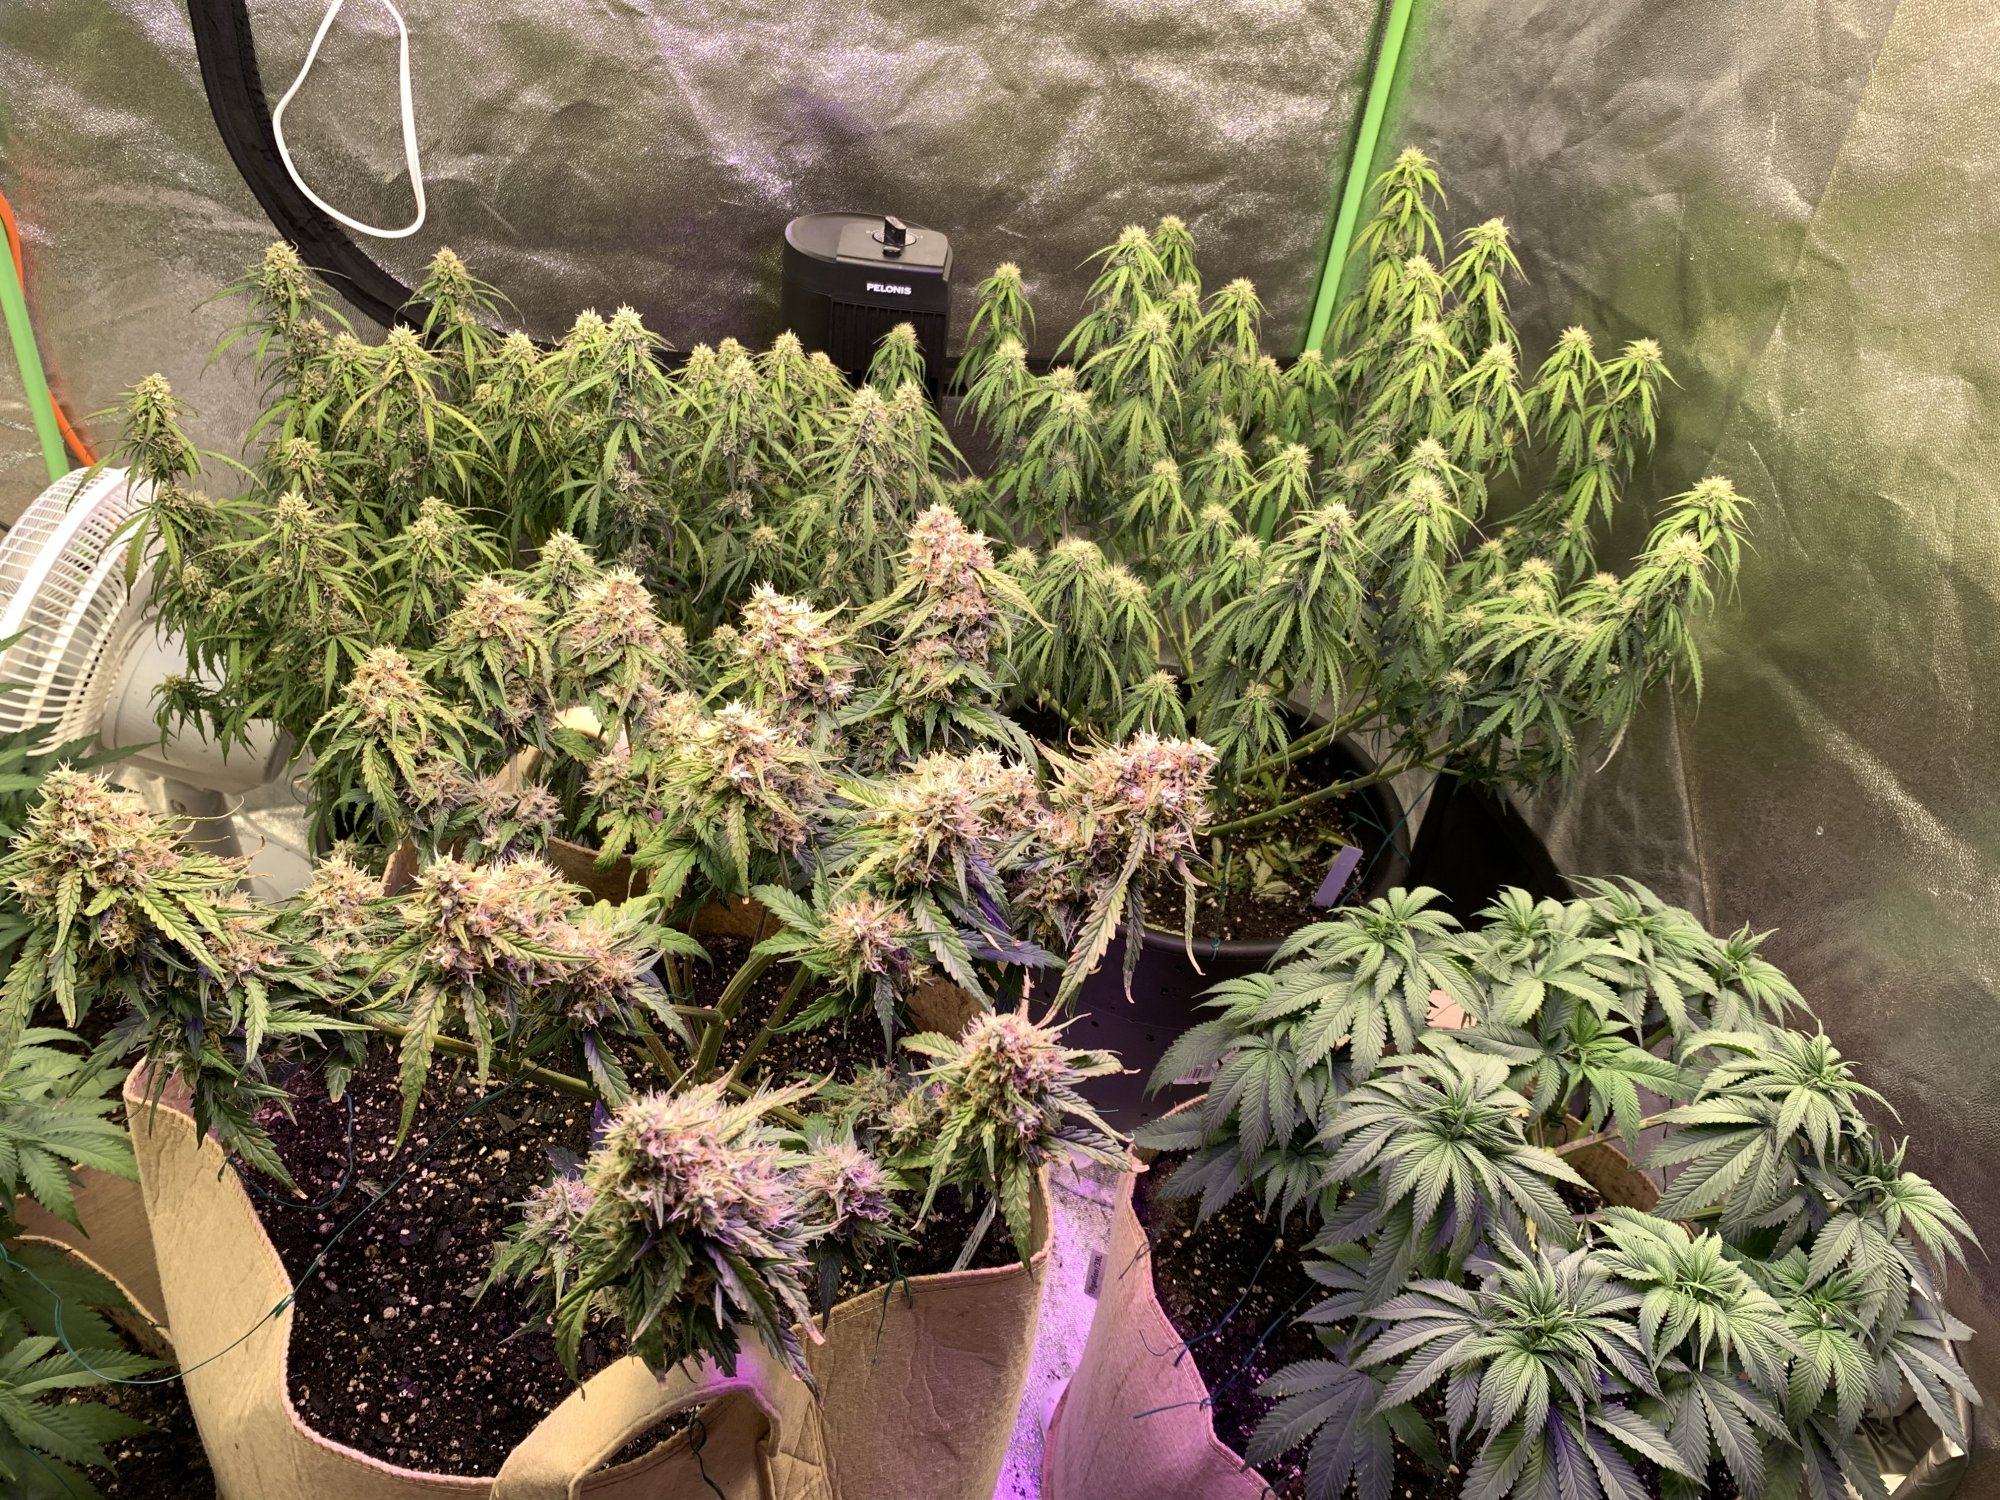 New grower using hlg quantum boards 9